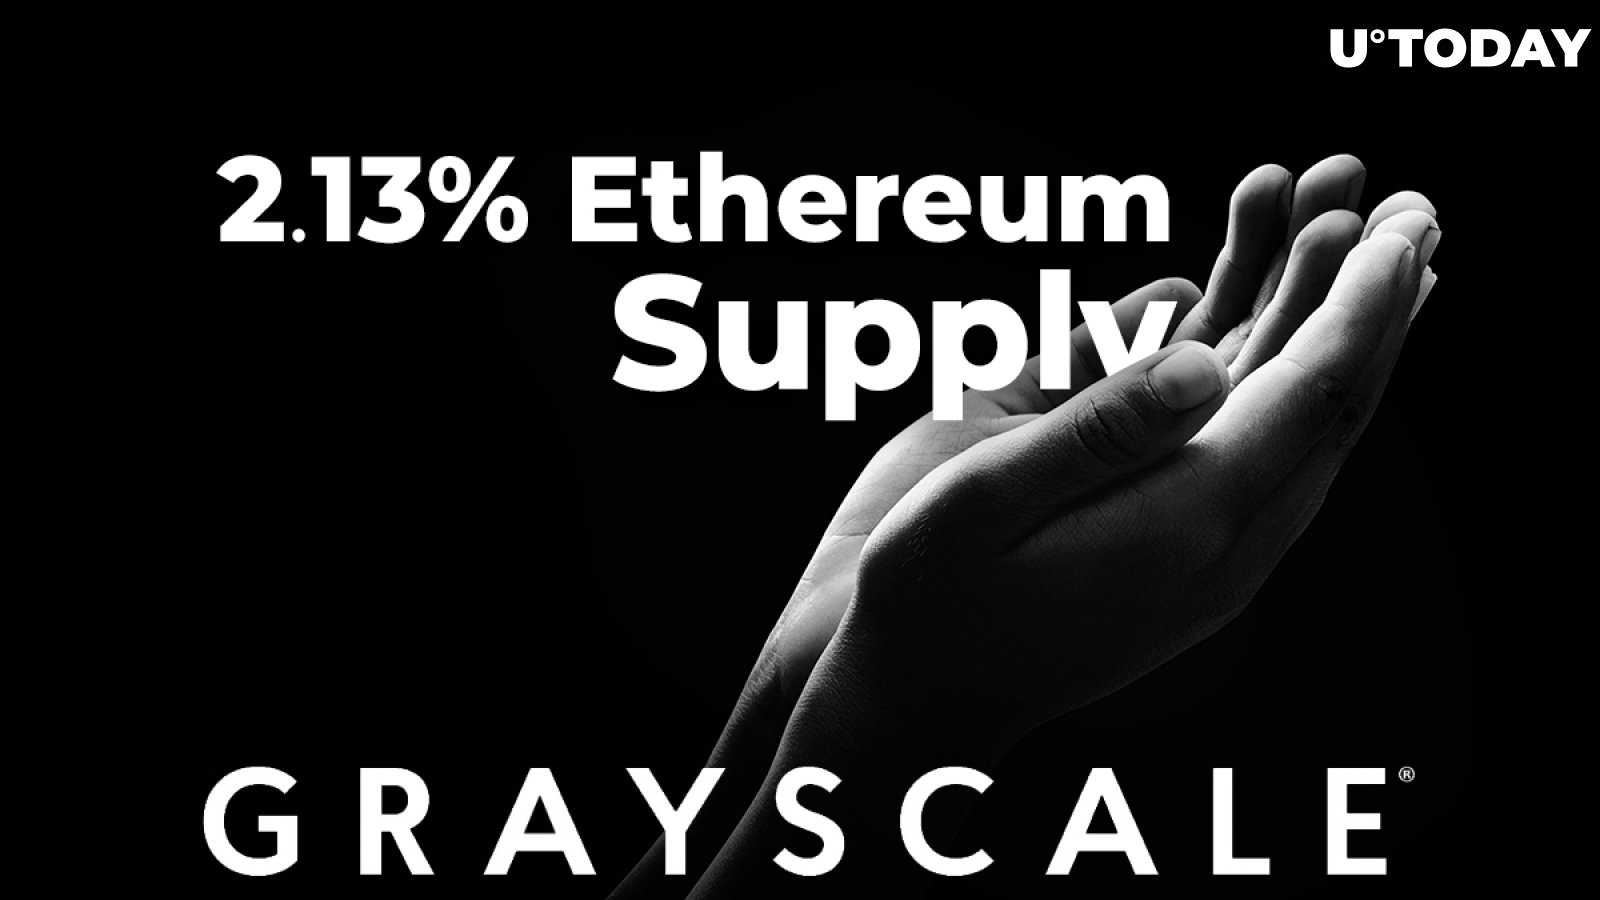 Grayscale Owns 2.13% Ethereum Supply After Acquiring 75,149 ETH Just Recently: Analyst